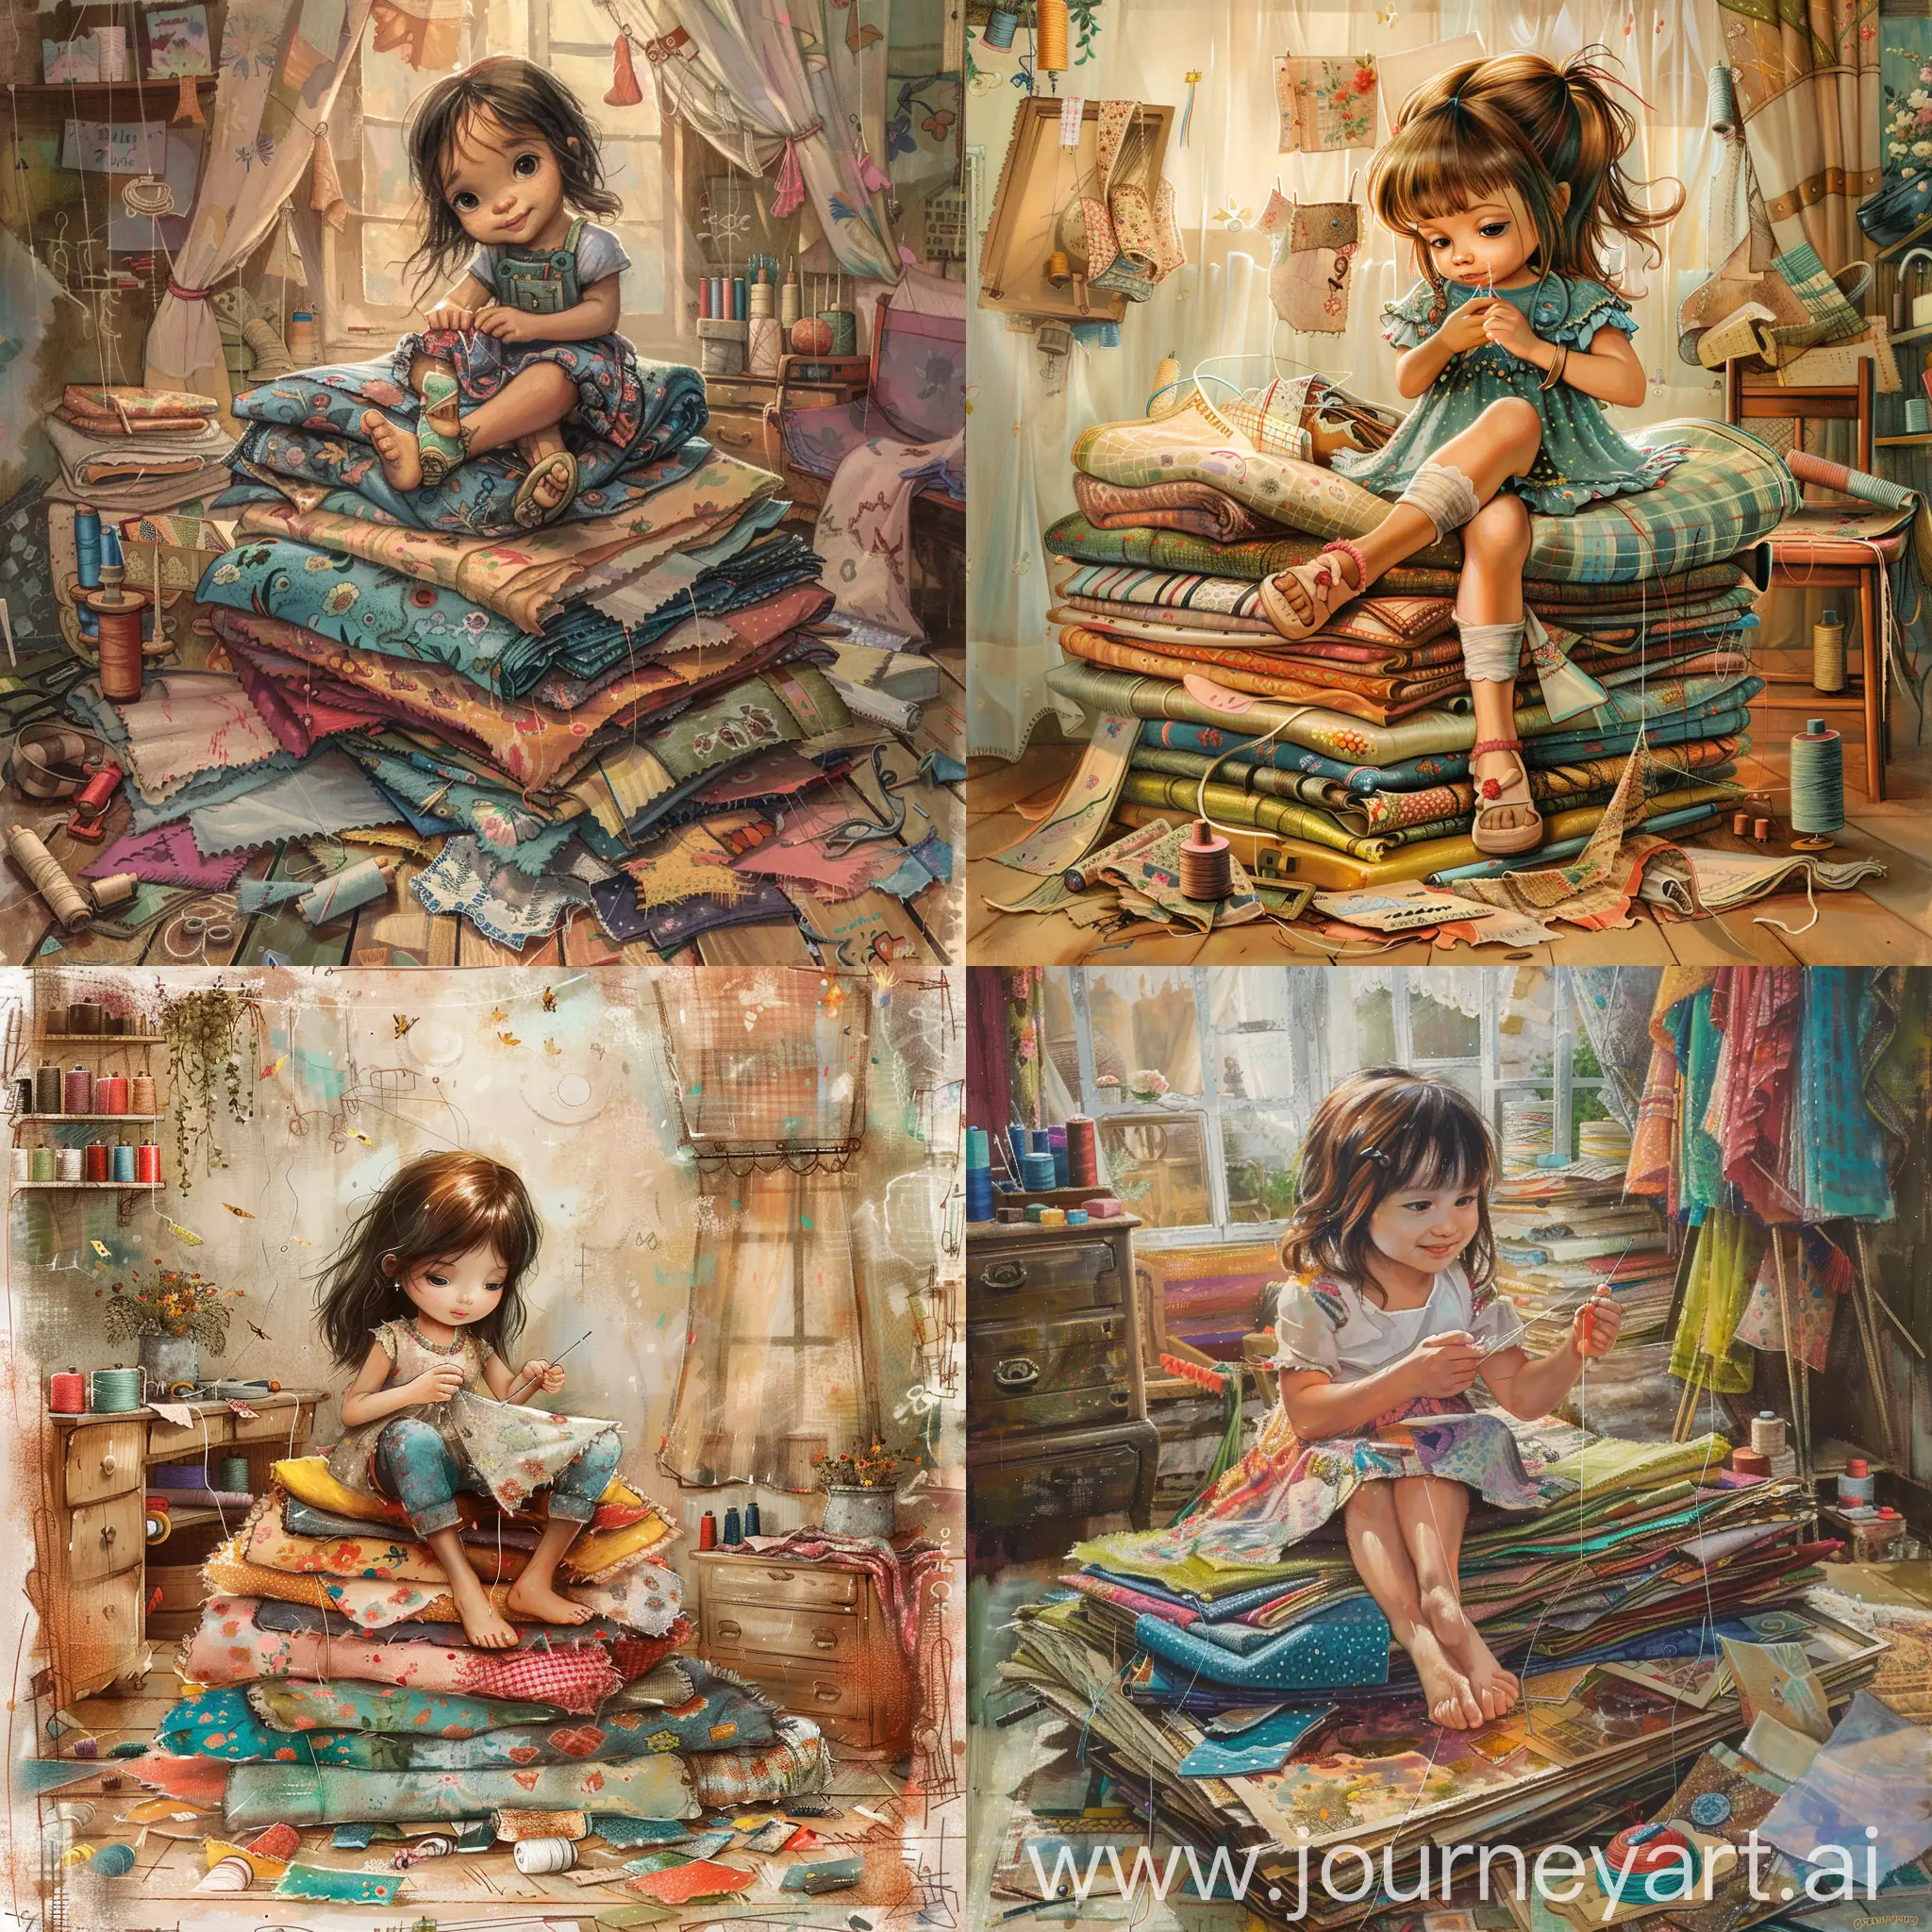 Prompt: a painting of a little girl sitting on a stack of fabric, scraps of fabric scattered on floor. she is a holding a needle and thread, hand sewing a piece of fabric. airbrush whimsical. background is a cute sewing room